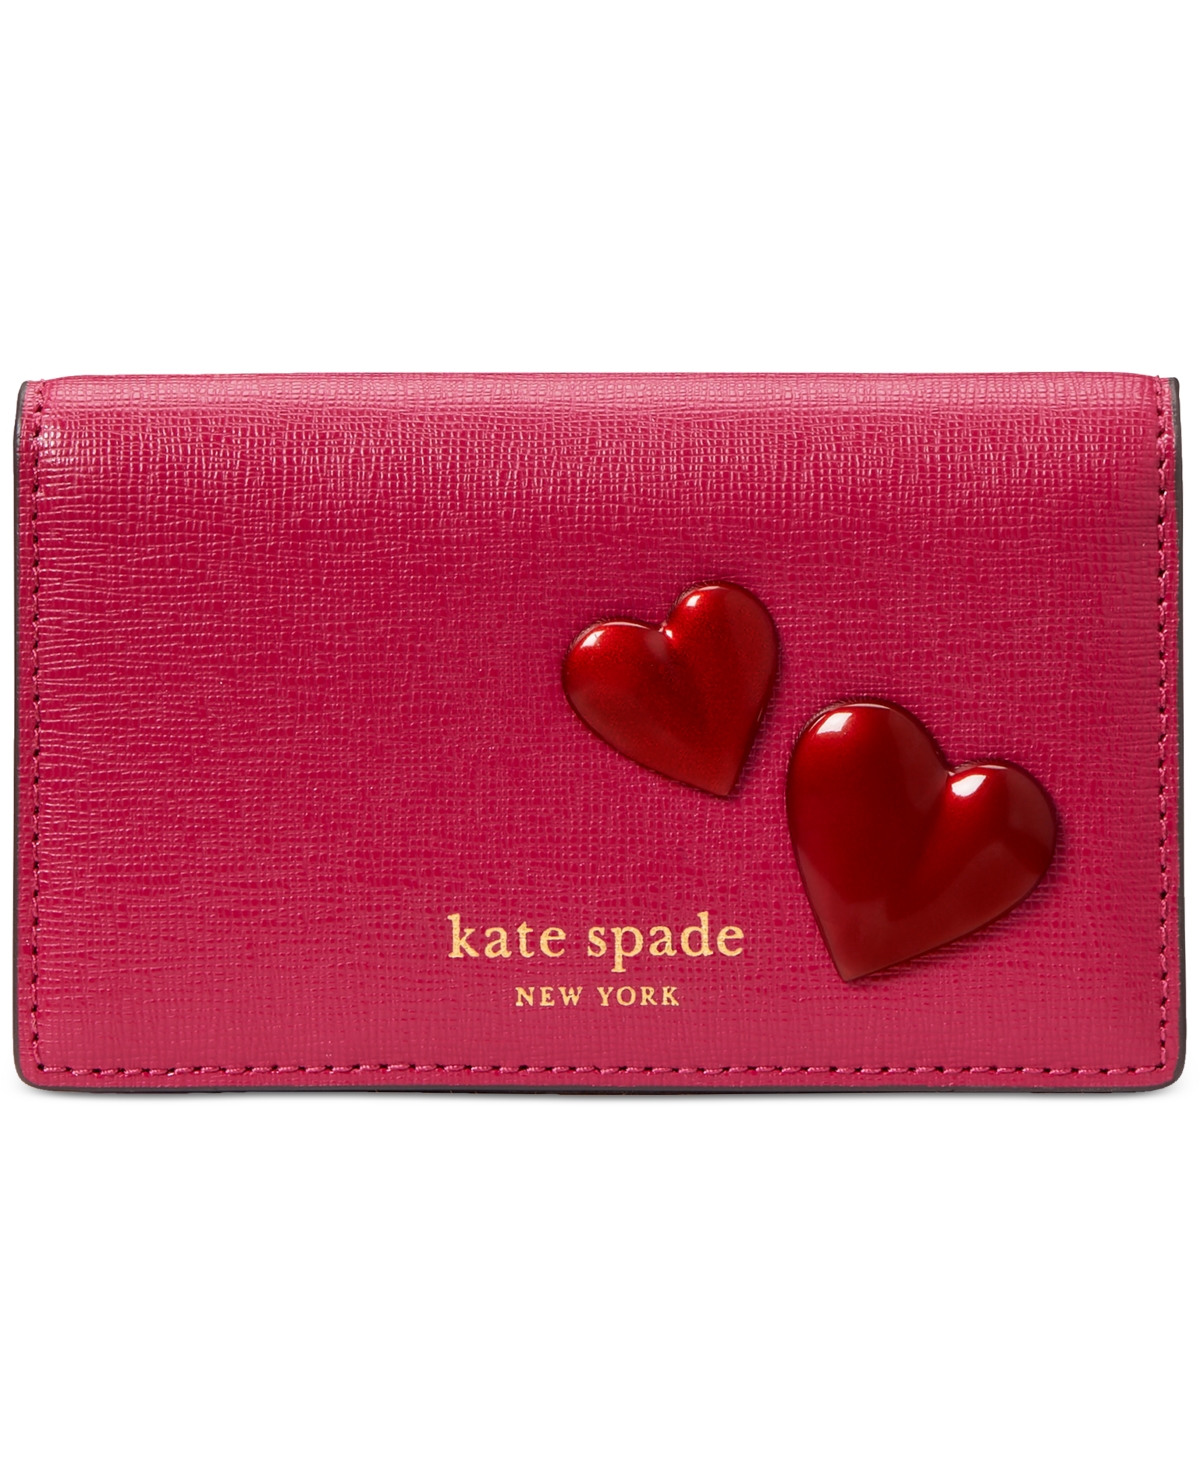 KATE SPADE PITTER PATTER SMOOTH LEATHER BIFOLD SNAP WALLET